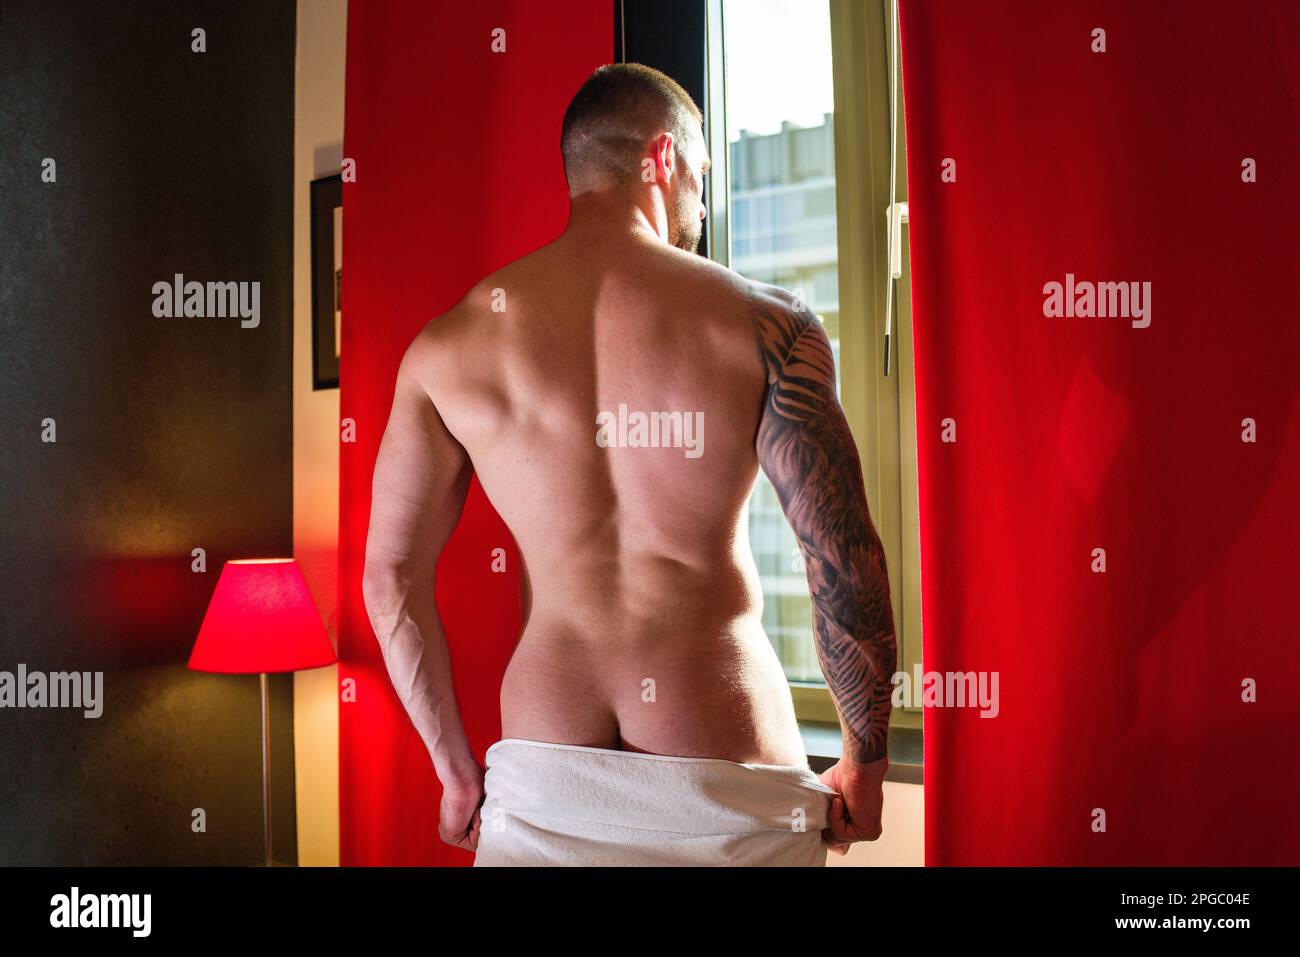 Handsome nude man in a bedroom. Young sexy man at night. Muscular handsome man in hotel room on window curtains. Shirtless topless sexy male model Stock Photo